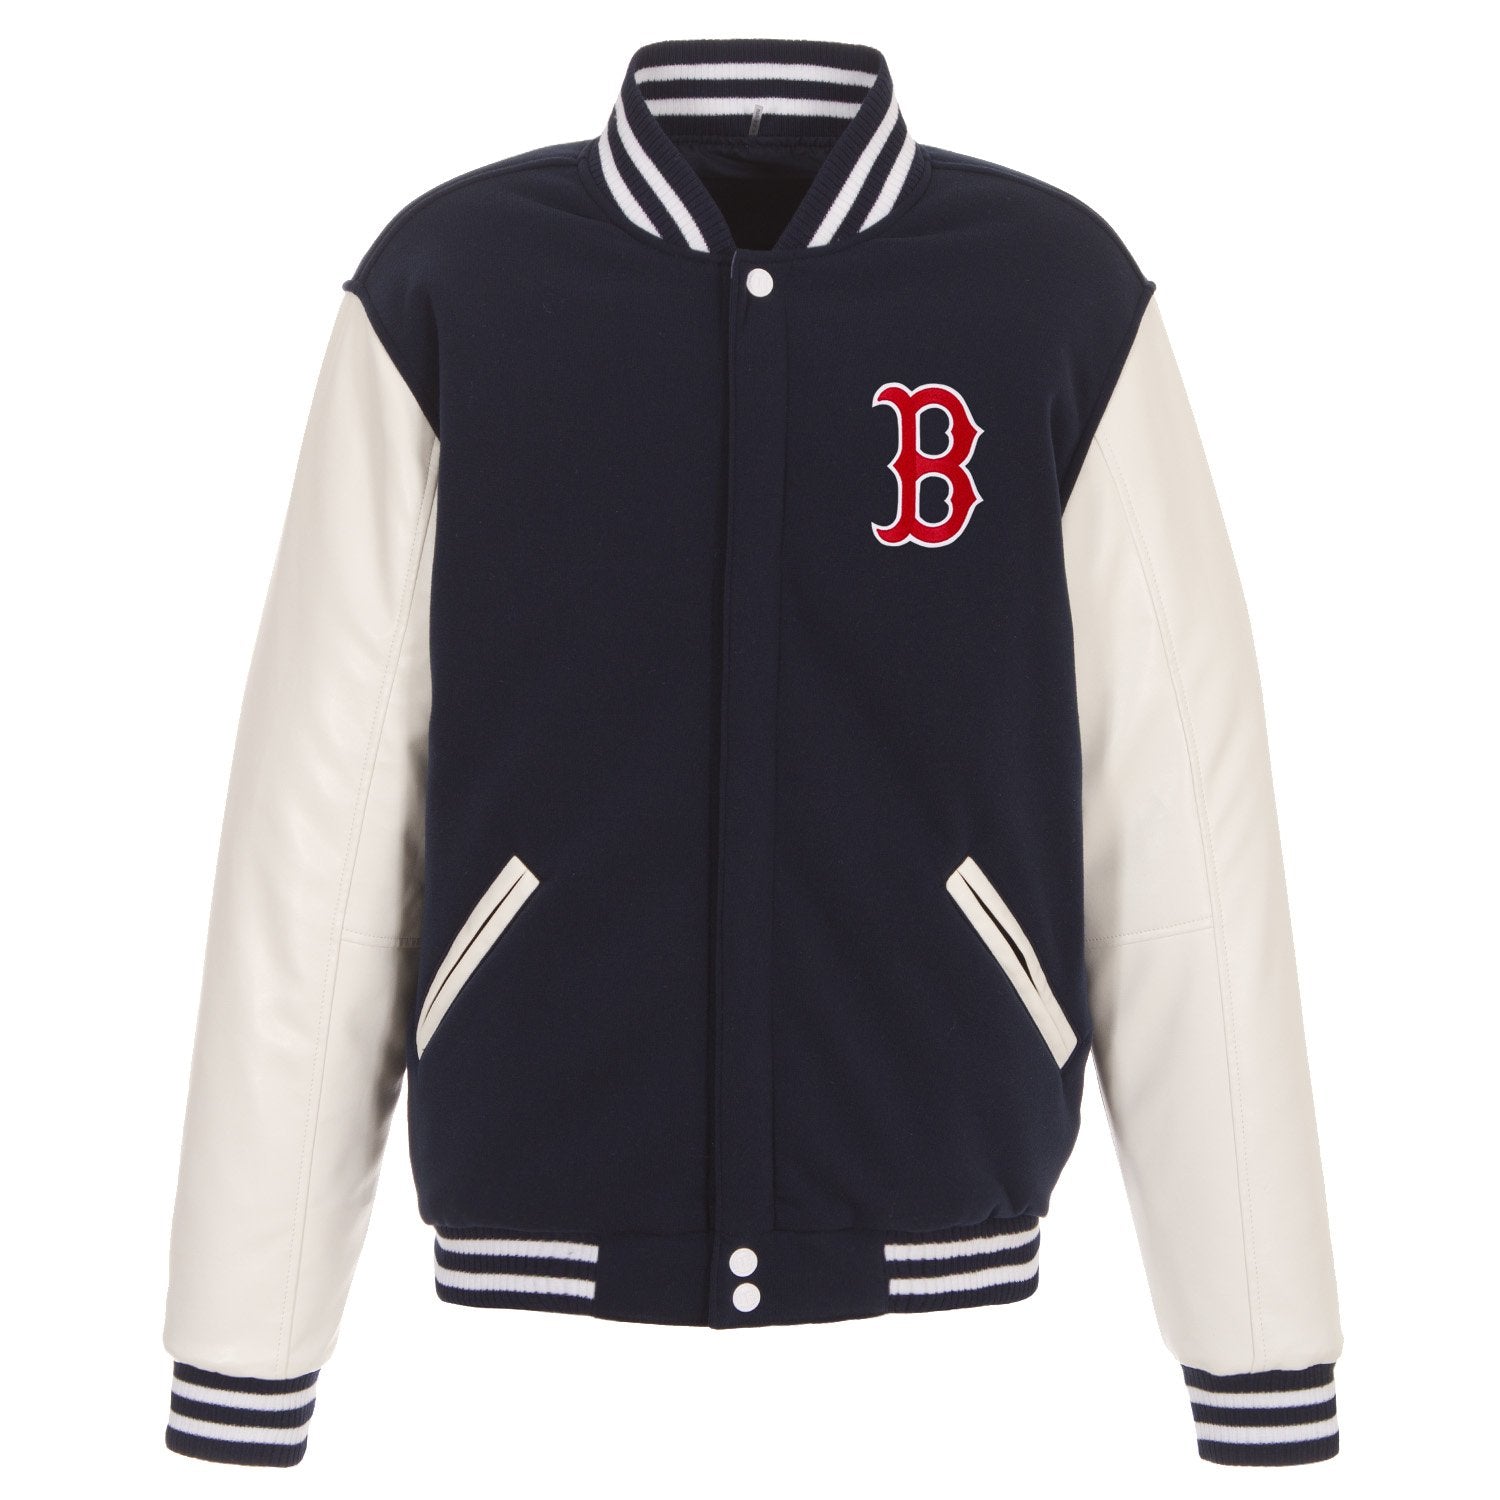 red Sox Jackets